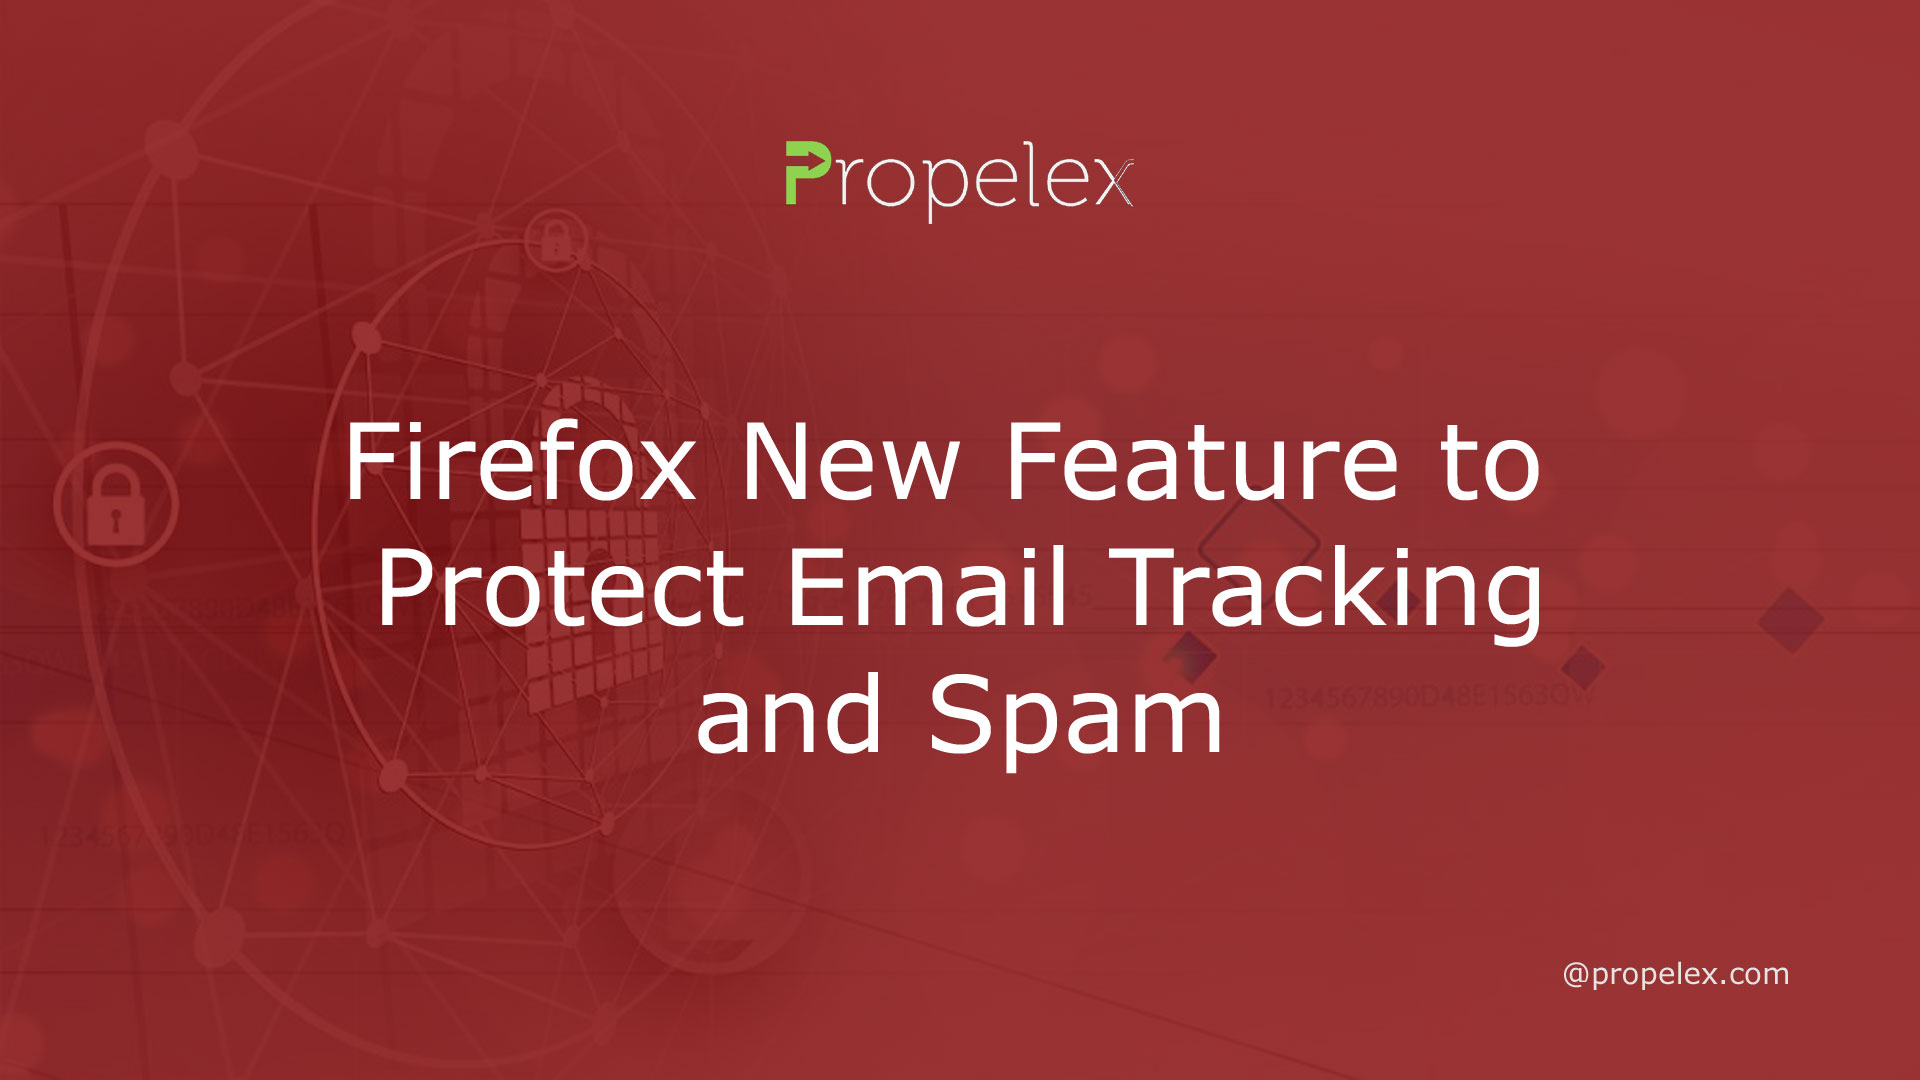 Firefox New Feature to Protect Email Tracking and Spam